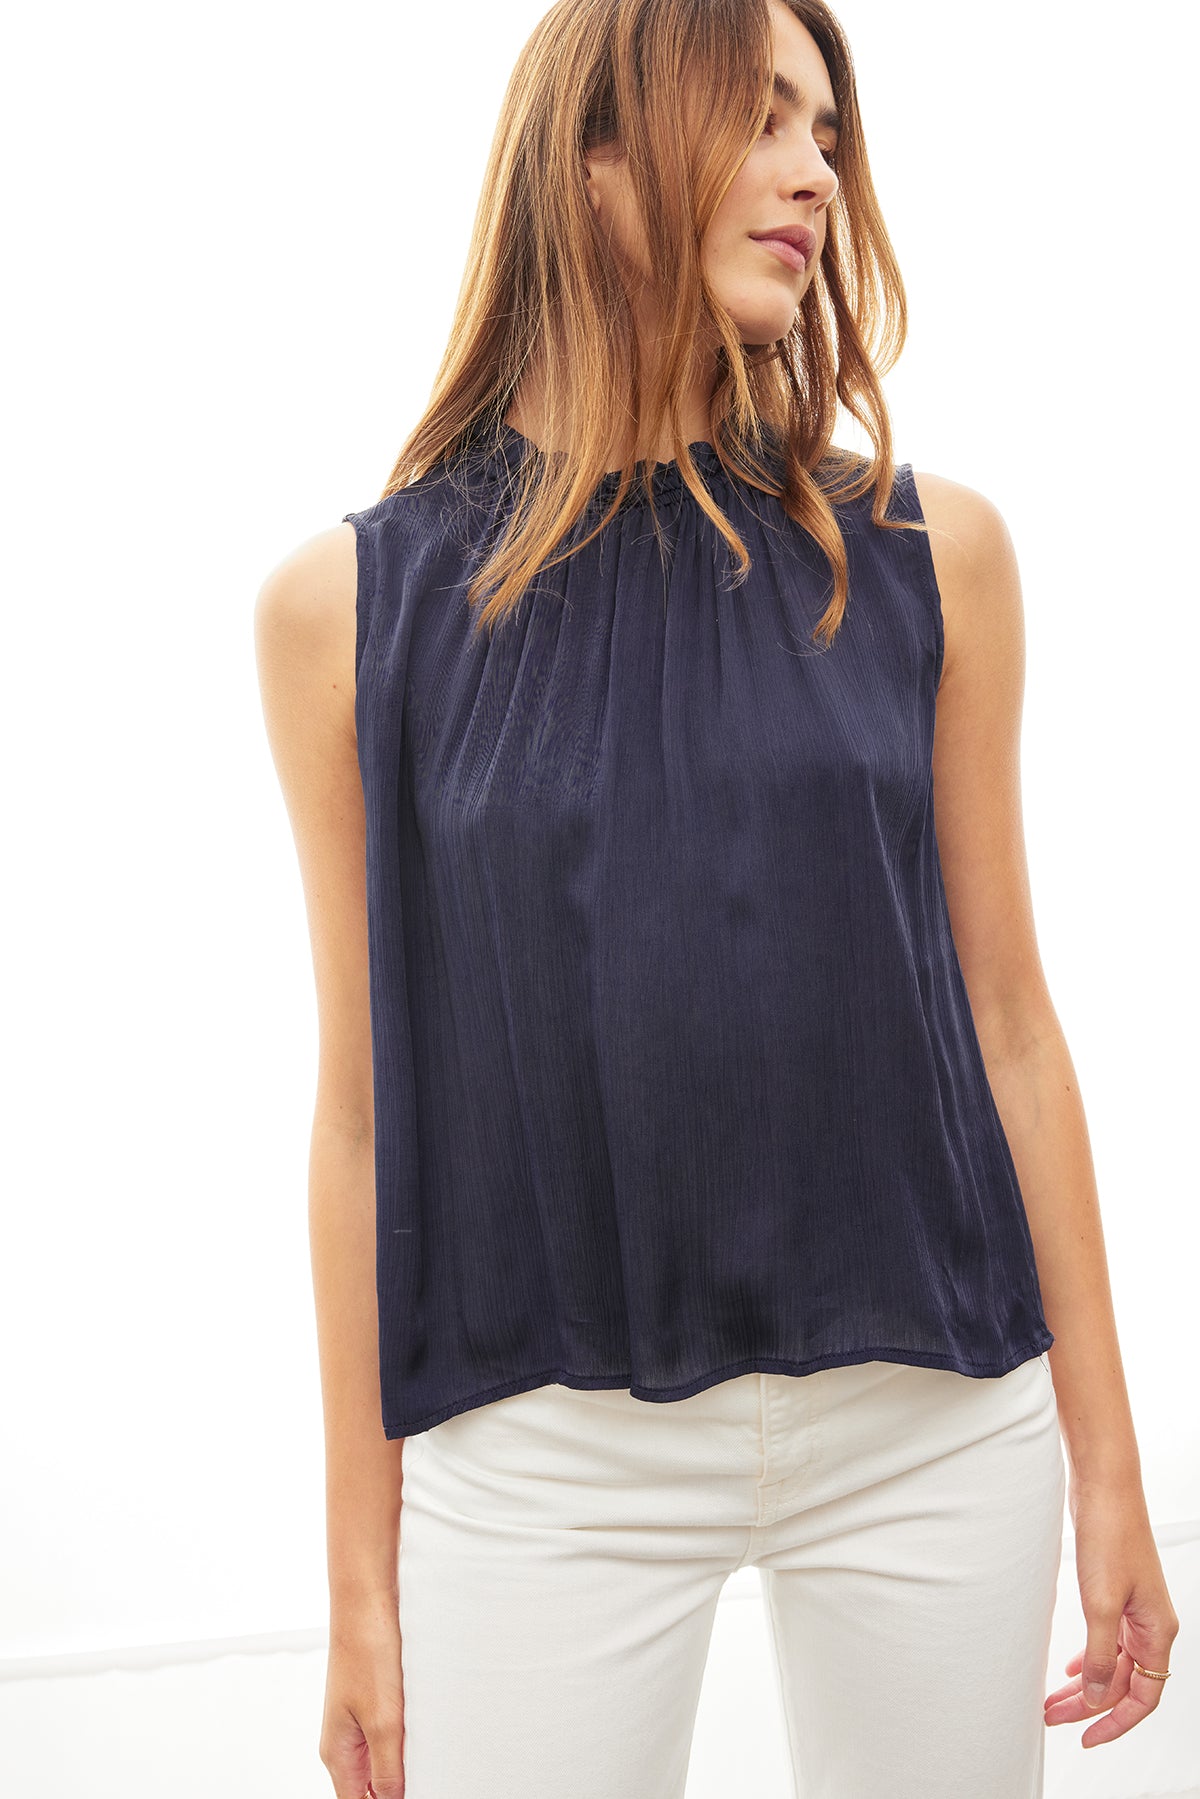 Woman in a KIANA RUFFLE NECK TANK TOP by Velvet by Graham & Spencer, navy blue tank top with an elastic ruffle neckline and white pants, standing against a white background.-36409583567041